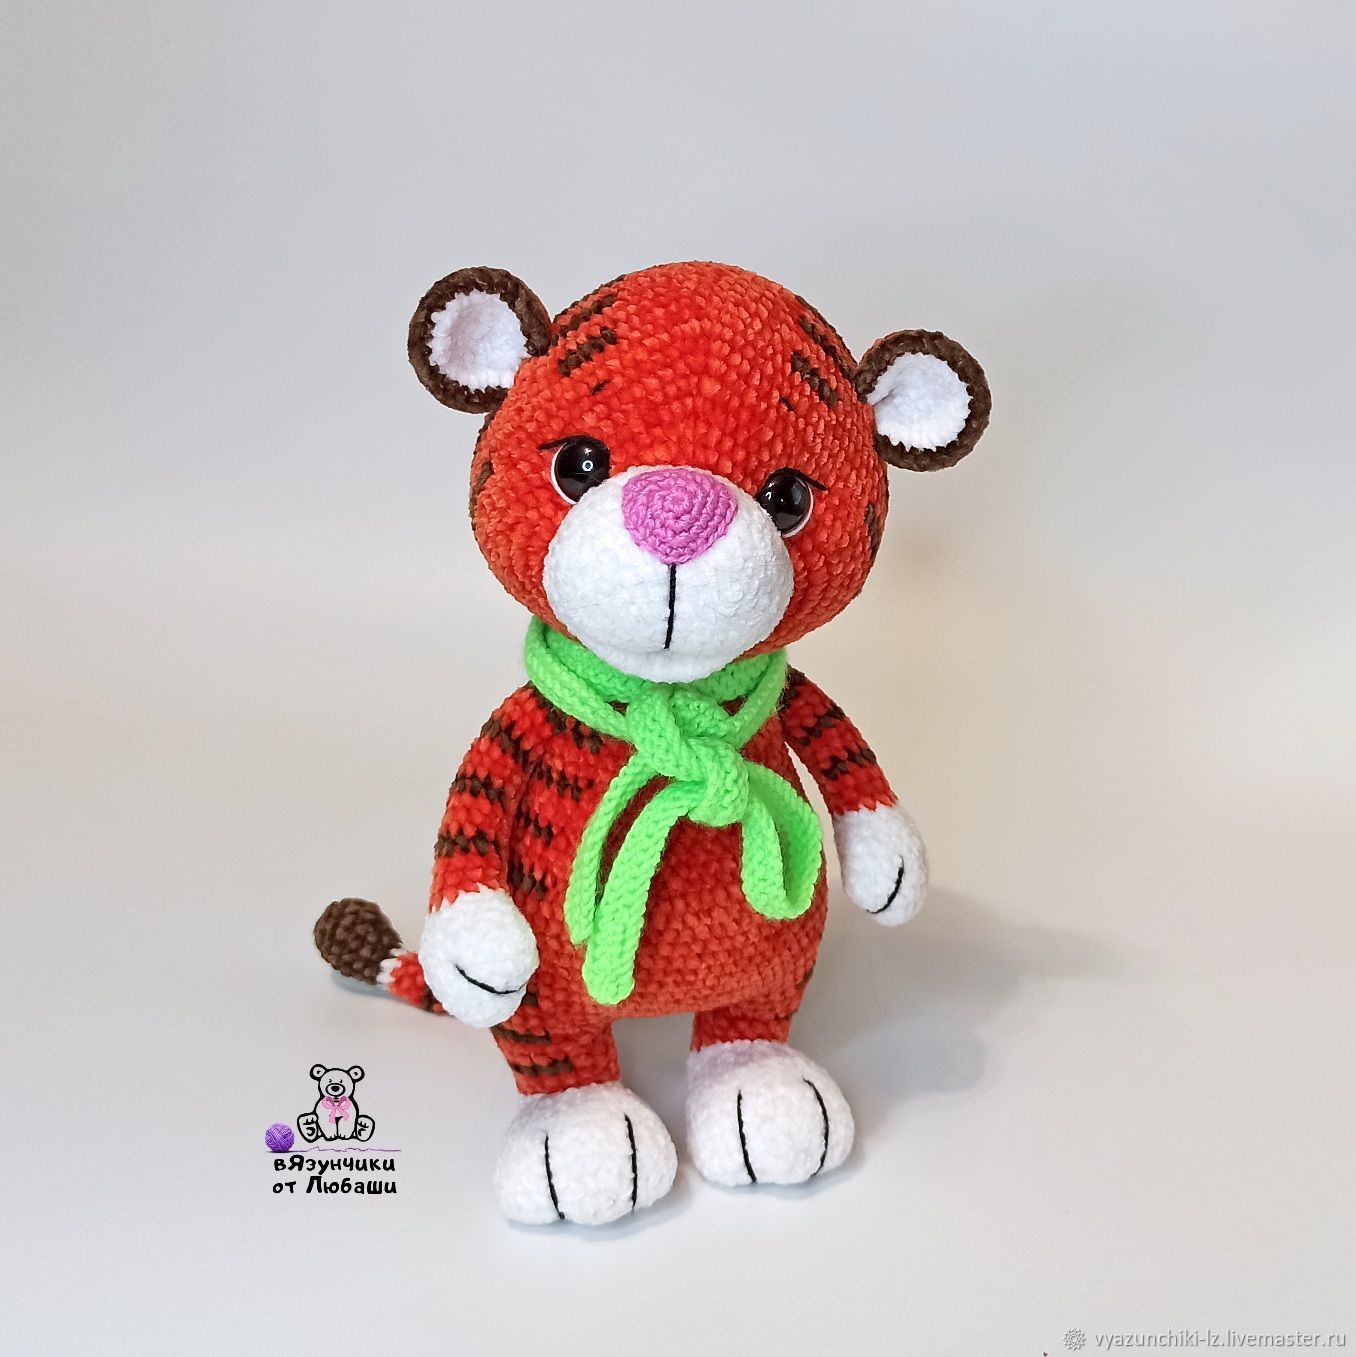 Tiger Timosha knitted tiger toy made of velour yarn as a gift, Stuffed Toys, Volokolamsk,  Фото №1